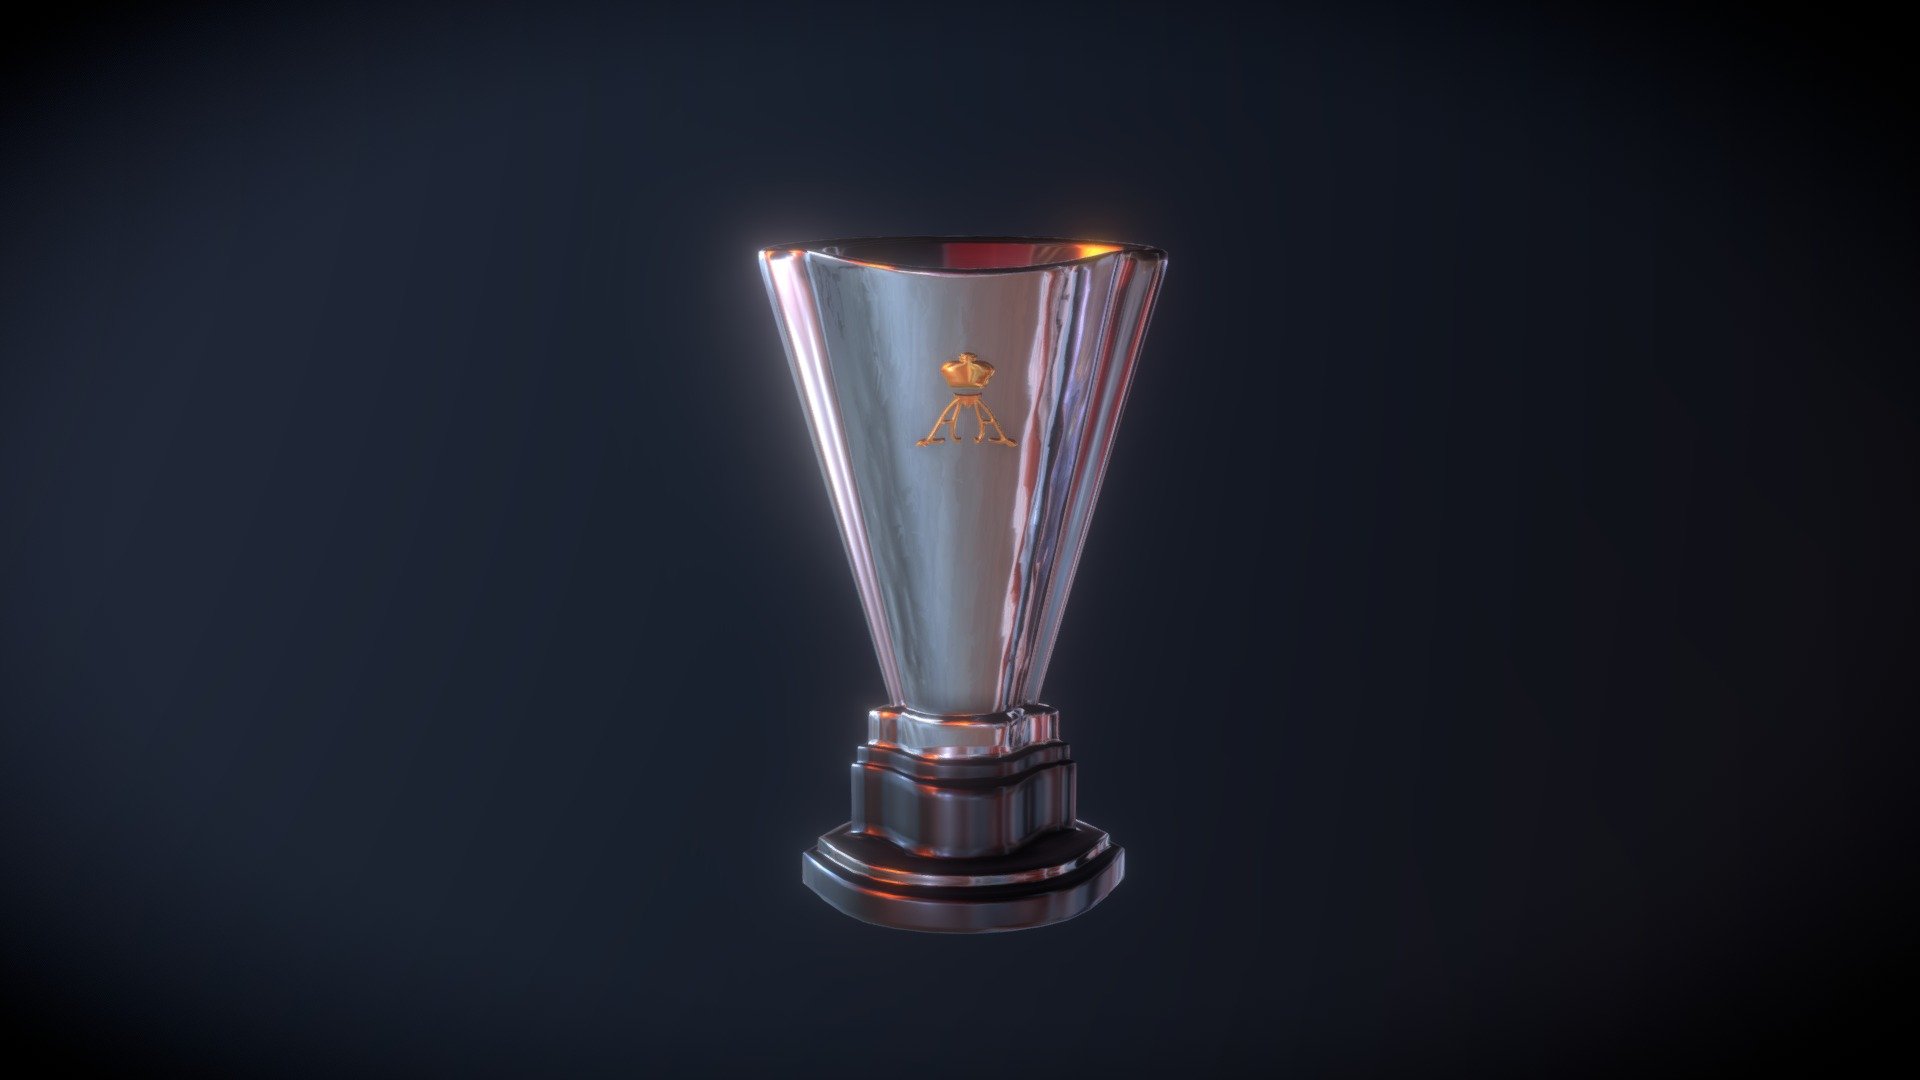 Trophy awarded to the winner of the Monaco Grand Prix during the lates 2000s (2006, 2007, 2008, 2009, 2010) in the Formula 1 Championship. Model comes with PBR textures in .blend, .obj, .fbx and watertight .stl files.

PBR Textures 2048x2048:

Albedo

Roughness

Metallness

Normal - F1 Trophy - Monaco 2000s Formula 1 GP - Buy Royalty Free 3D model by Machine Meza (@maurib98) 3d model